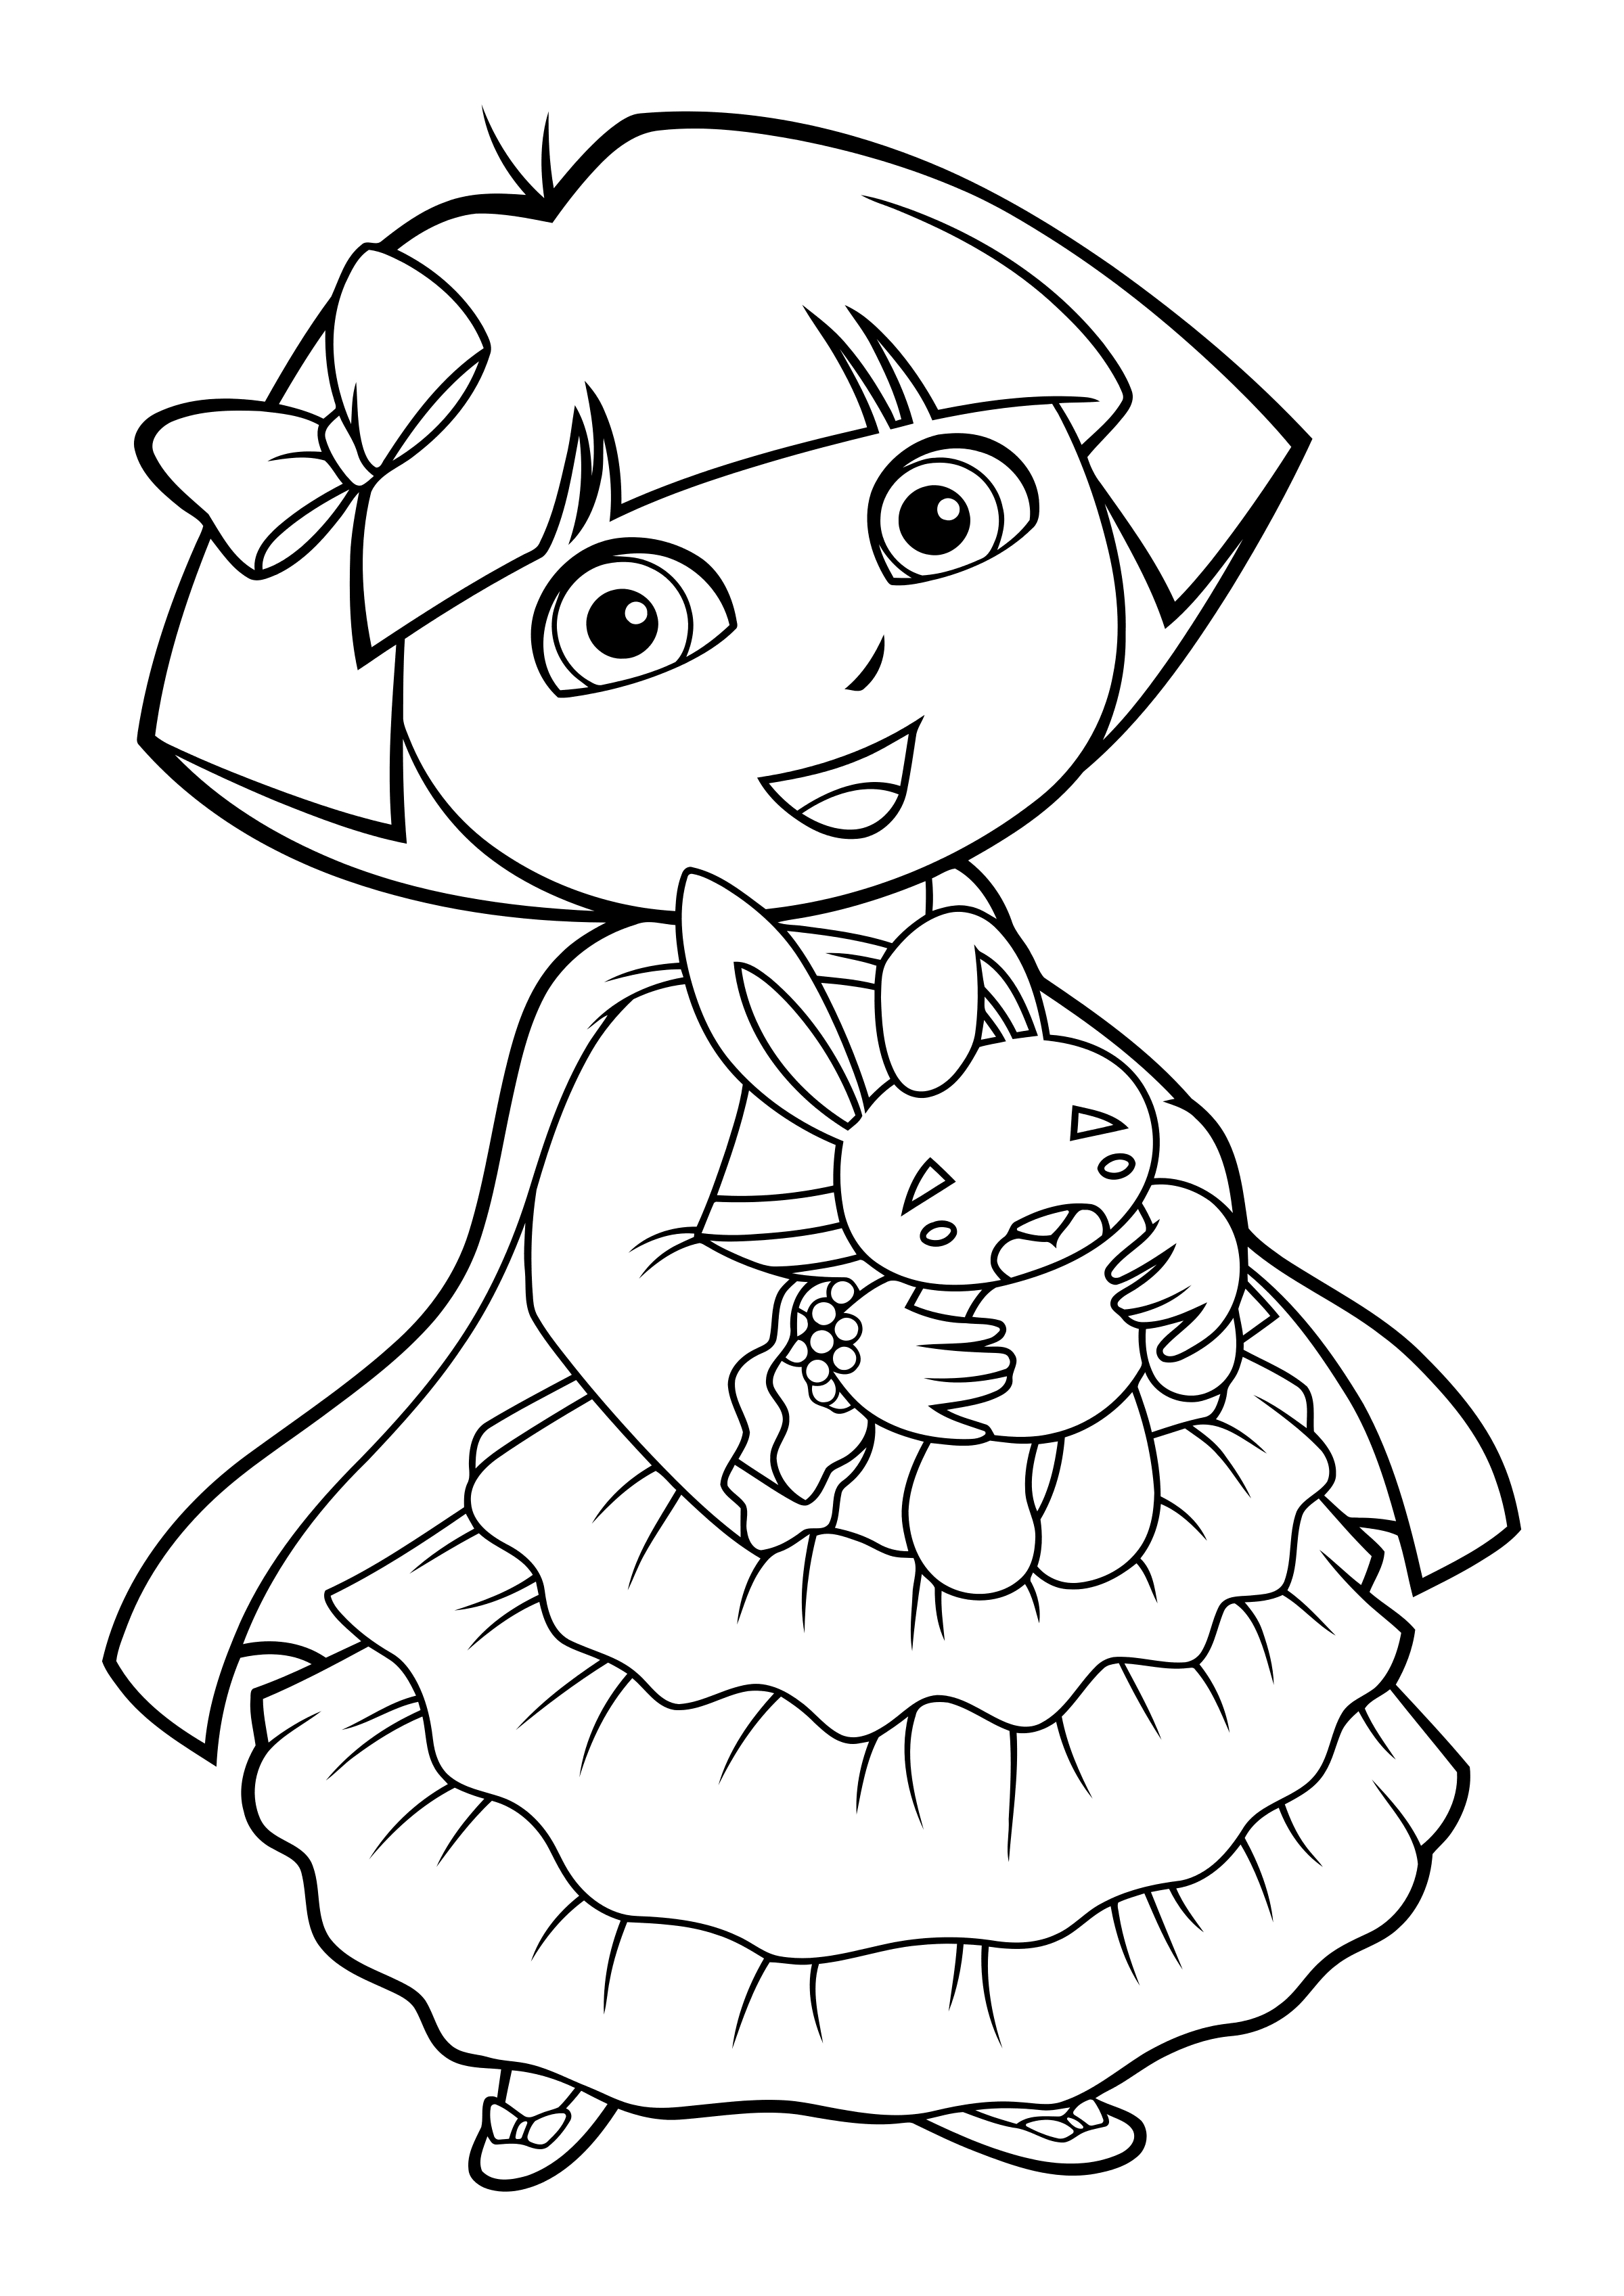 Coloring page Dora the Explorer Dora is a traveler in a dress